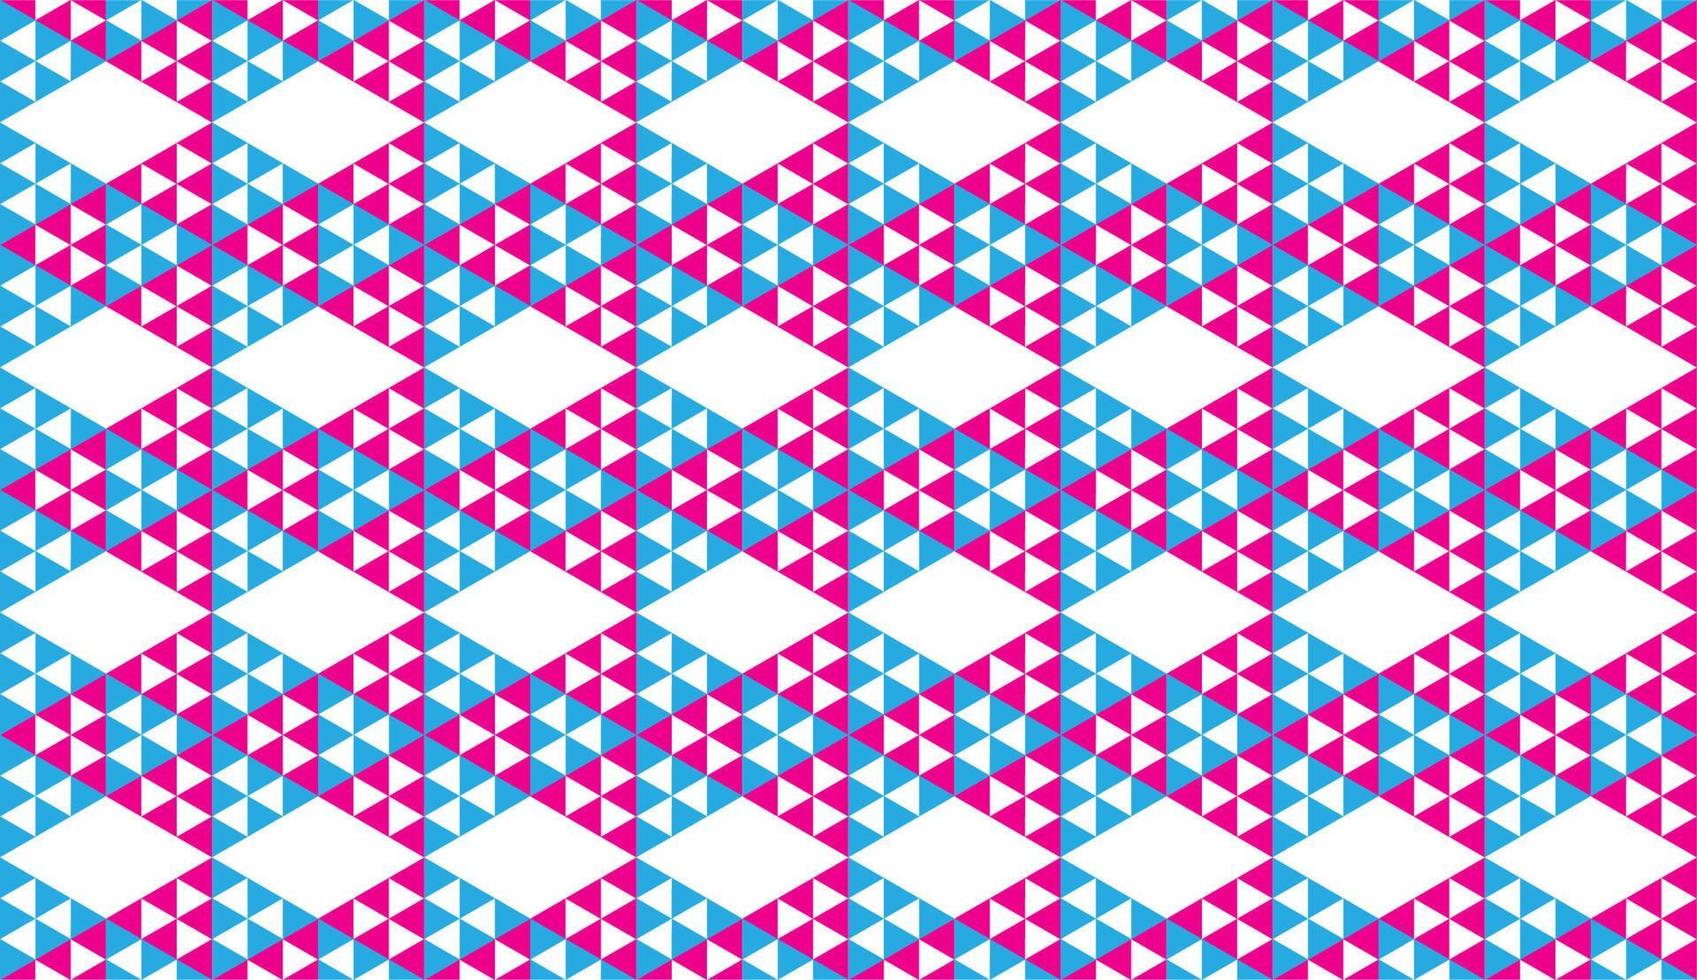 Colorful Abstract Triangles Ornament, Triangular Shapes Wallpaper. Geometric Seamless Pattern Design Template. Light Blue,Pink Magenta And White Color Theme. vector